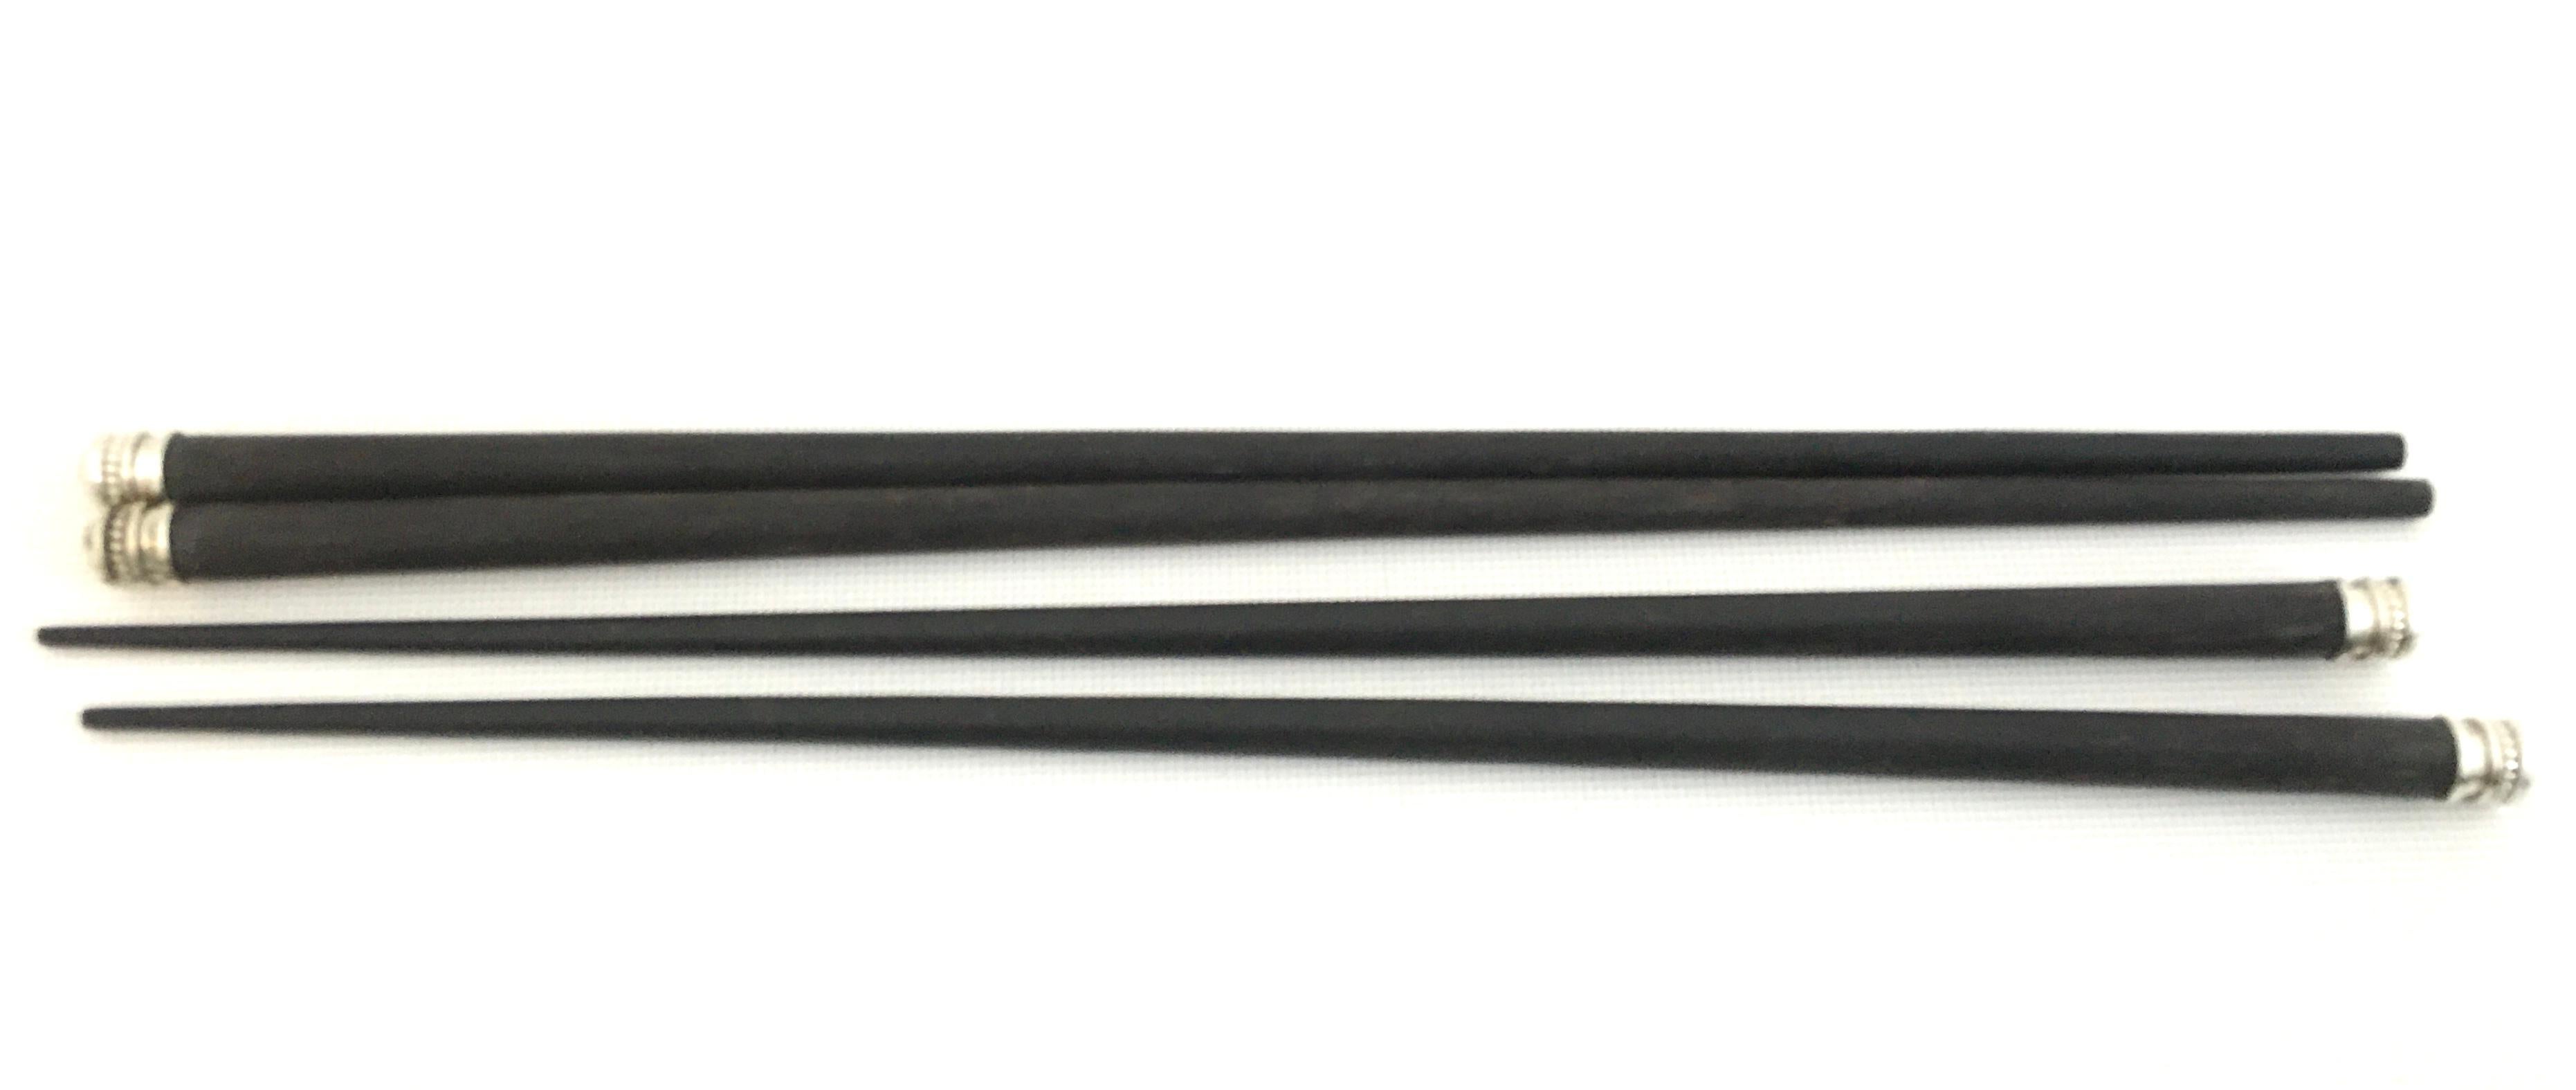 20th century Christofle silver France sterling silver & ebony chopsticks., Two Pairs. One pair is Japanese in style the other pair is Chinese is style. Both pairs are identical in features. Each chopstick is marked with the French 925 sterling